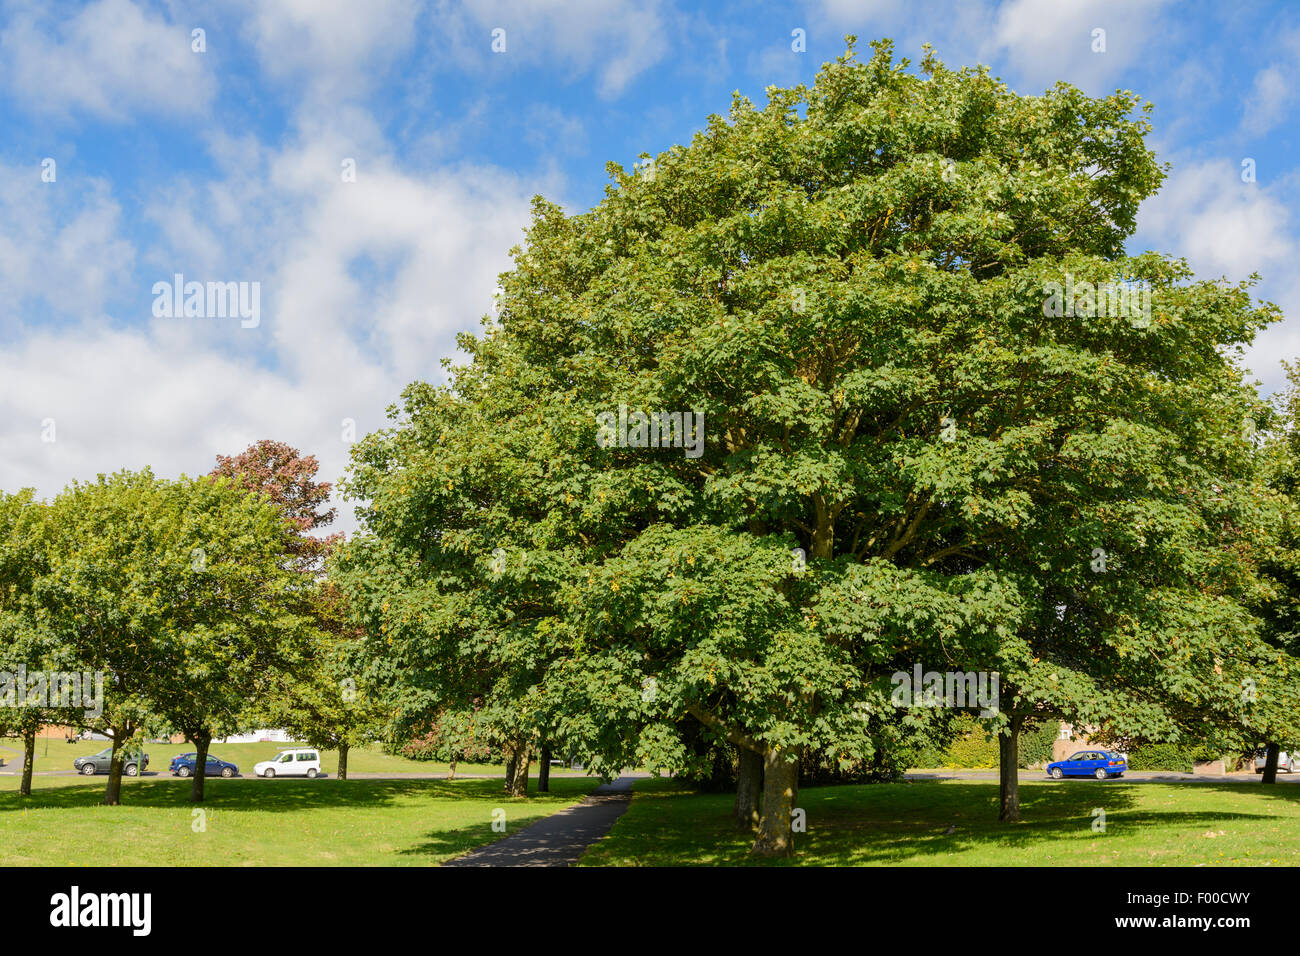 Sycamore Maple tree (Acer pseudoplatanus )in a park during summer in the UK. Stock Photo